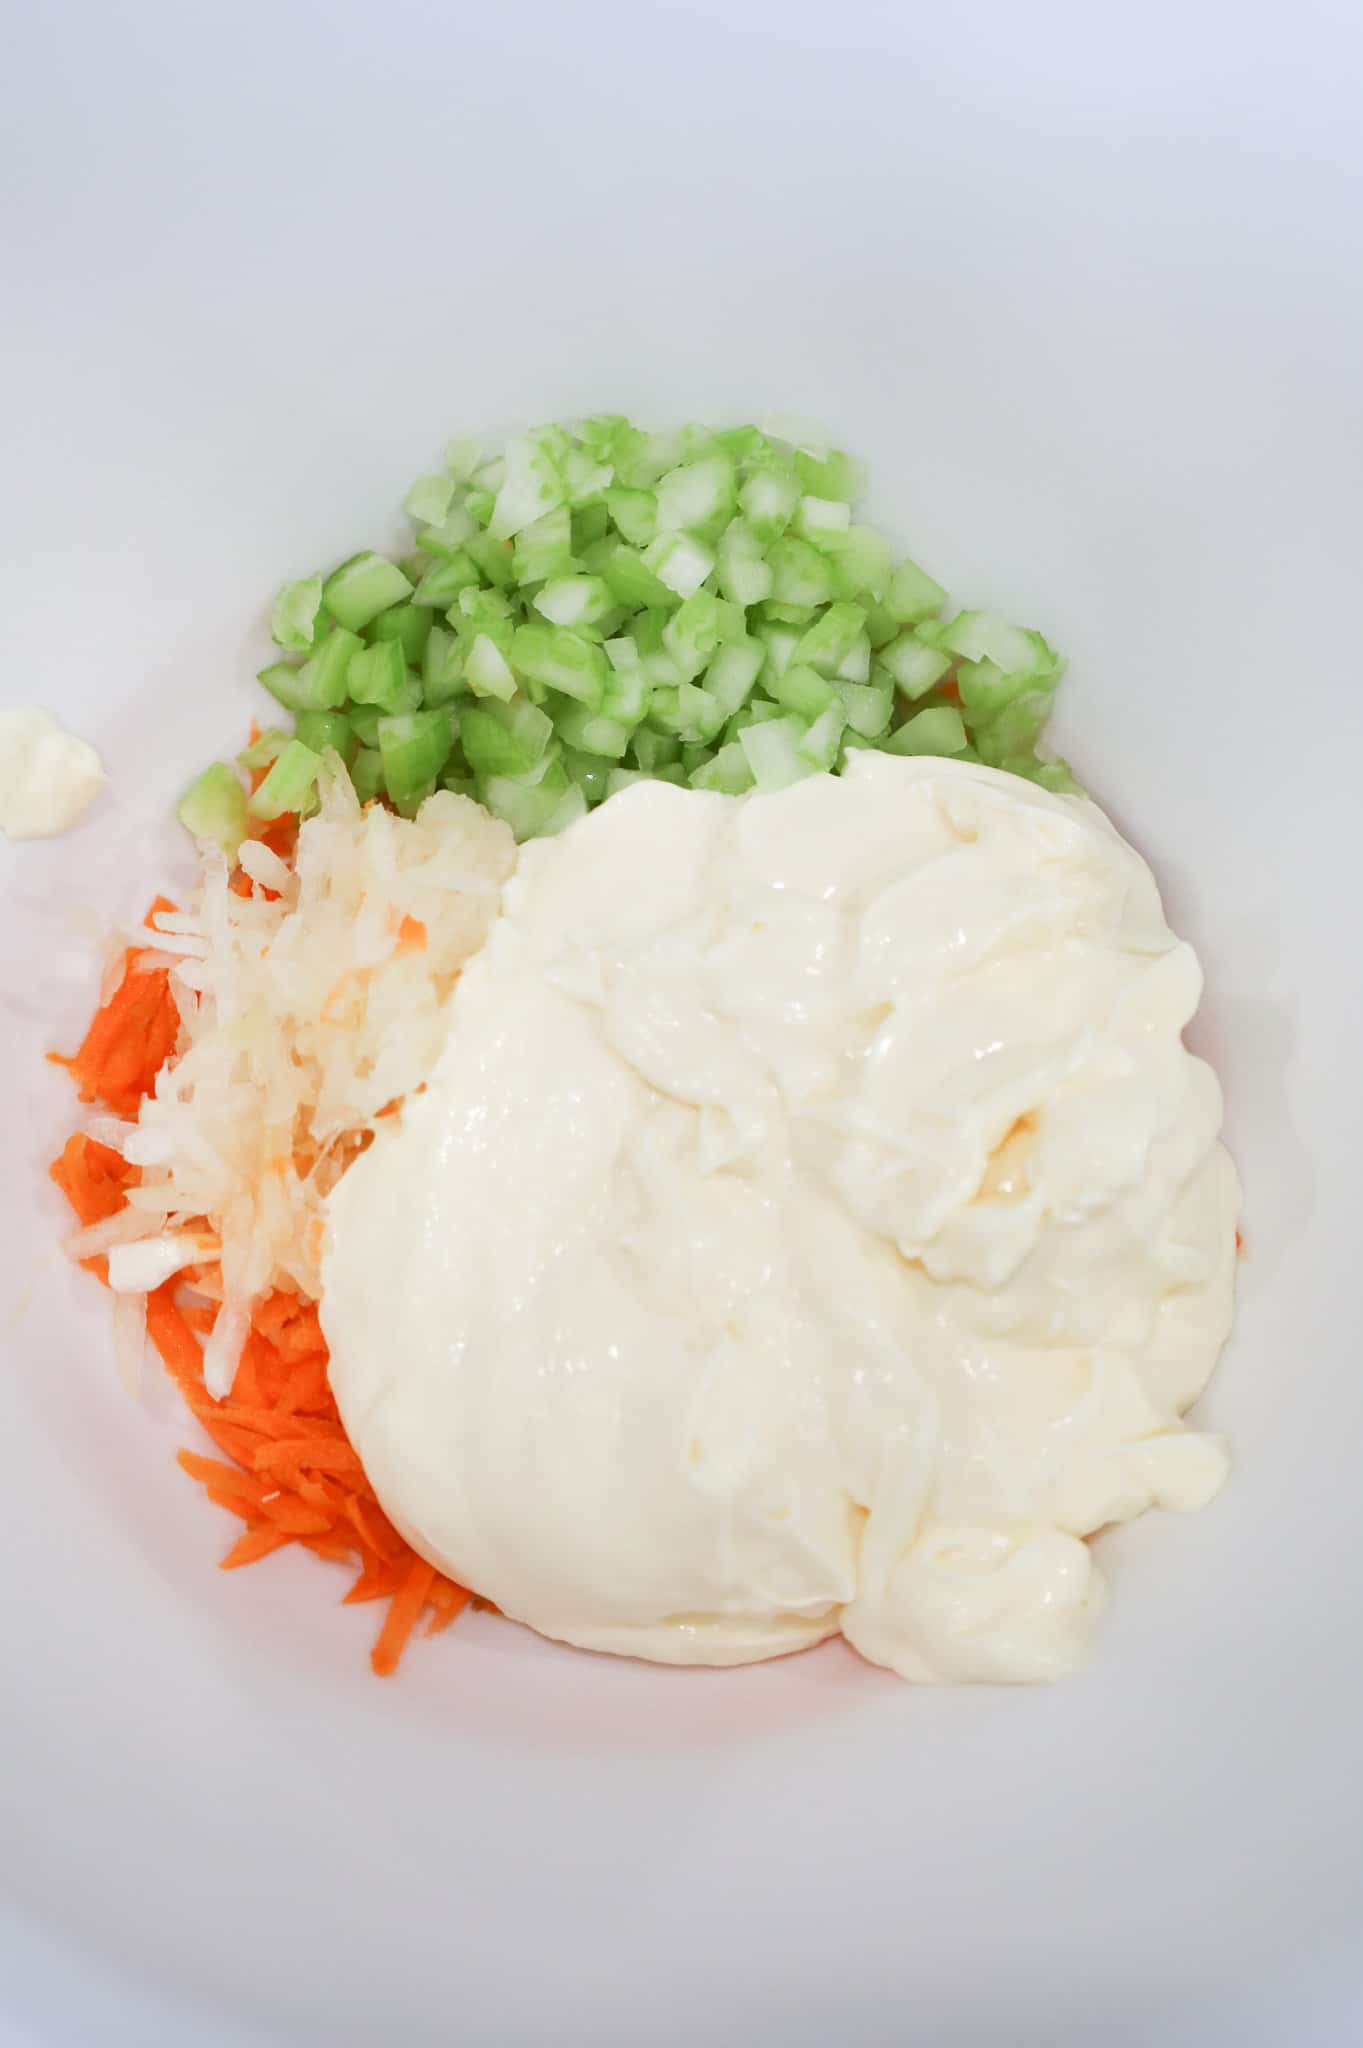 mayo, grated carrot, onion and celery in a mixing bowl